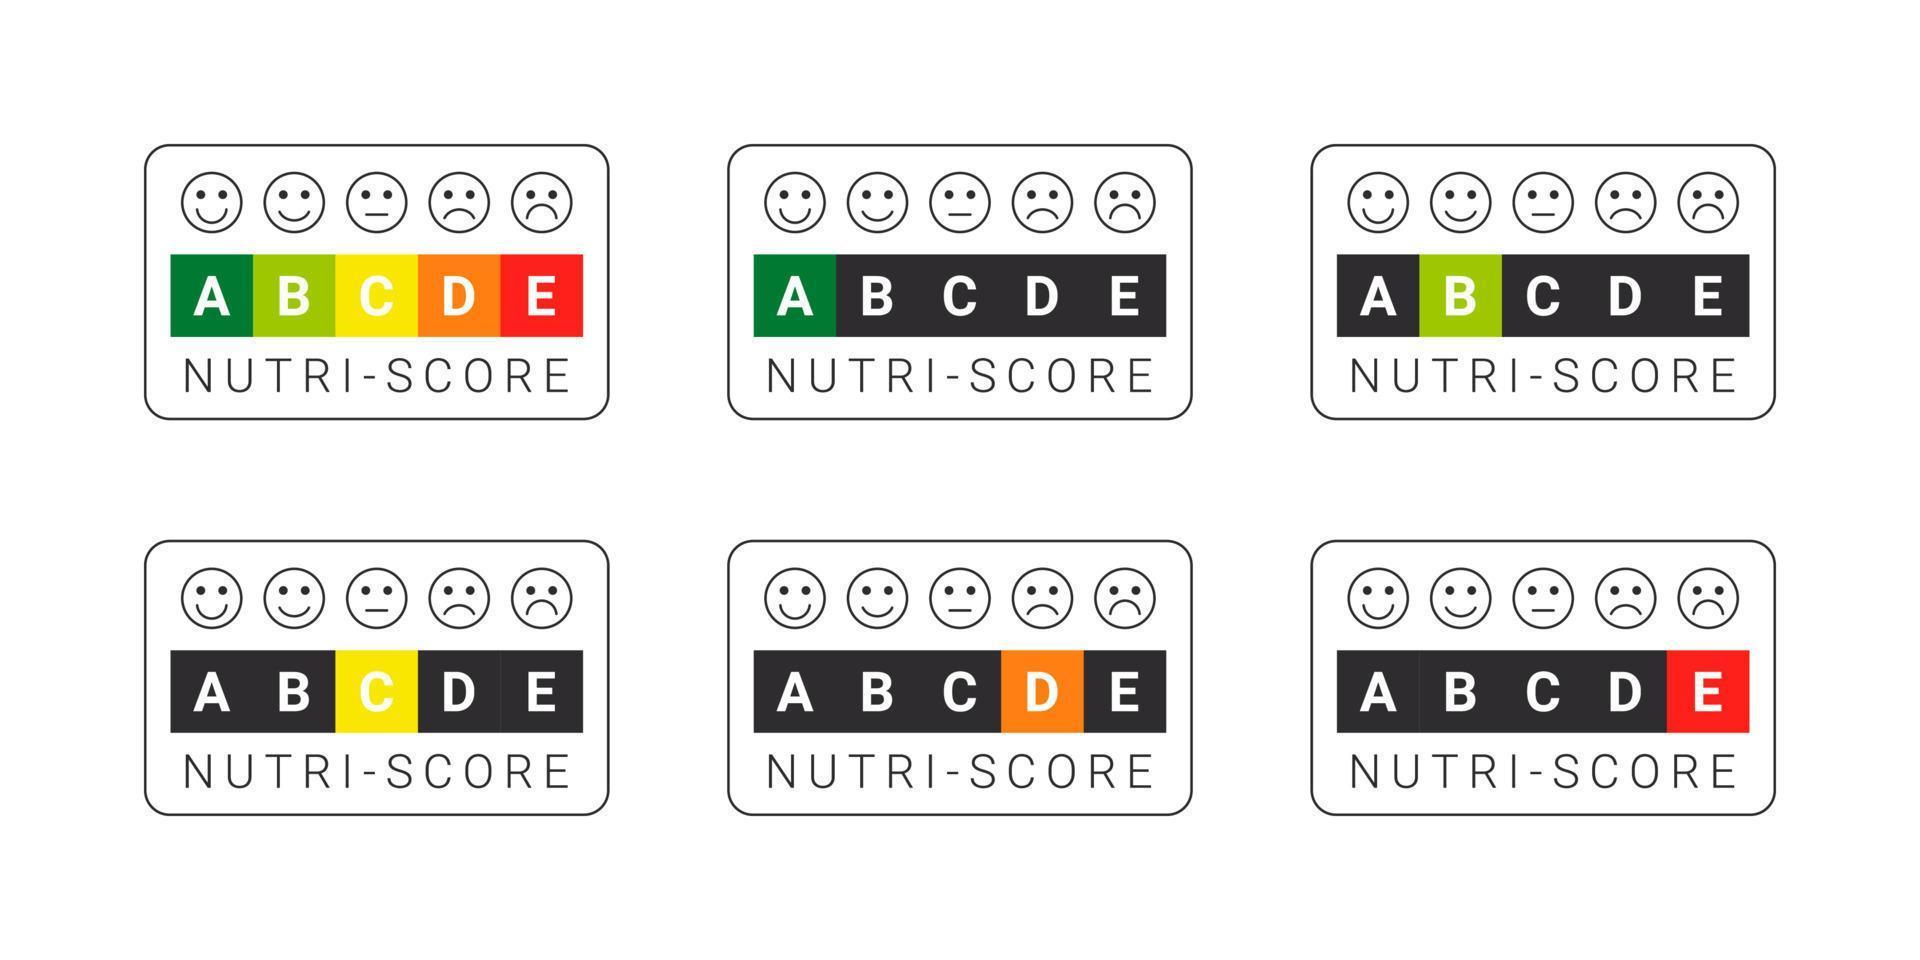 Nutri-score labels with emoticons. Food rating system signs. Health care nutrition indicator. Nutri-score stickers. Vector illustration